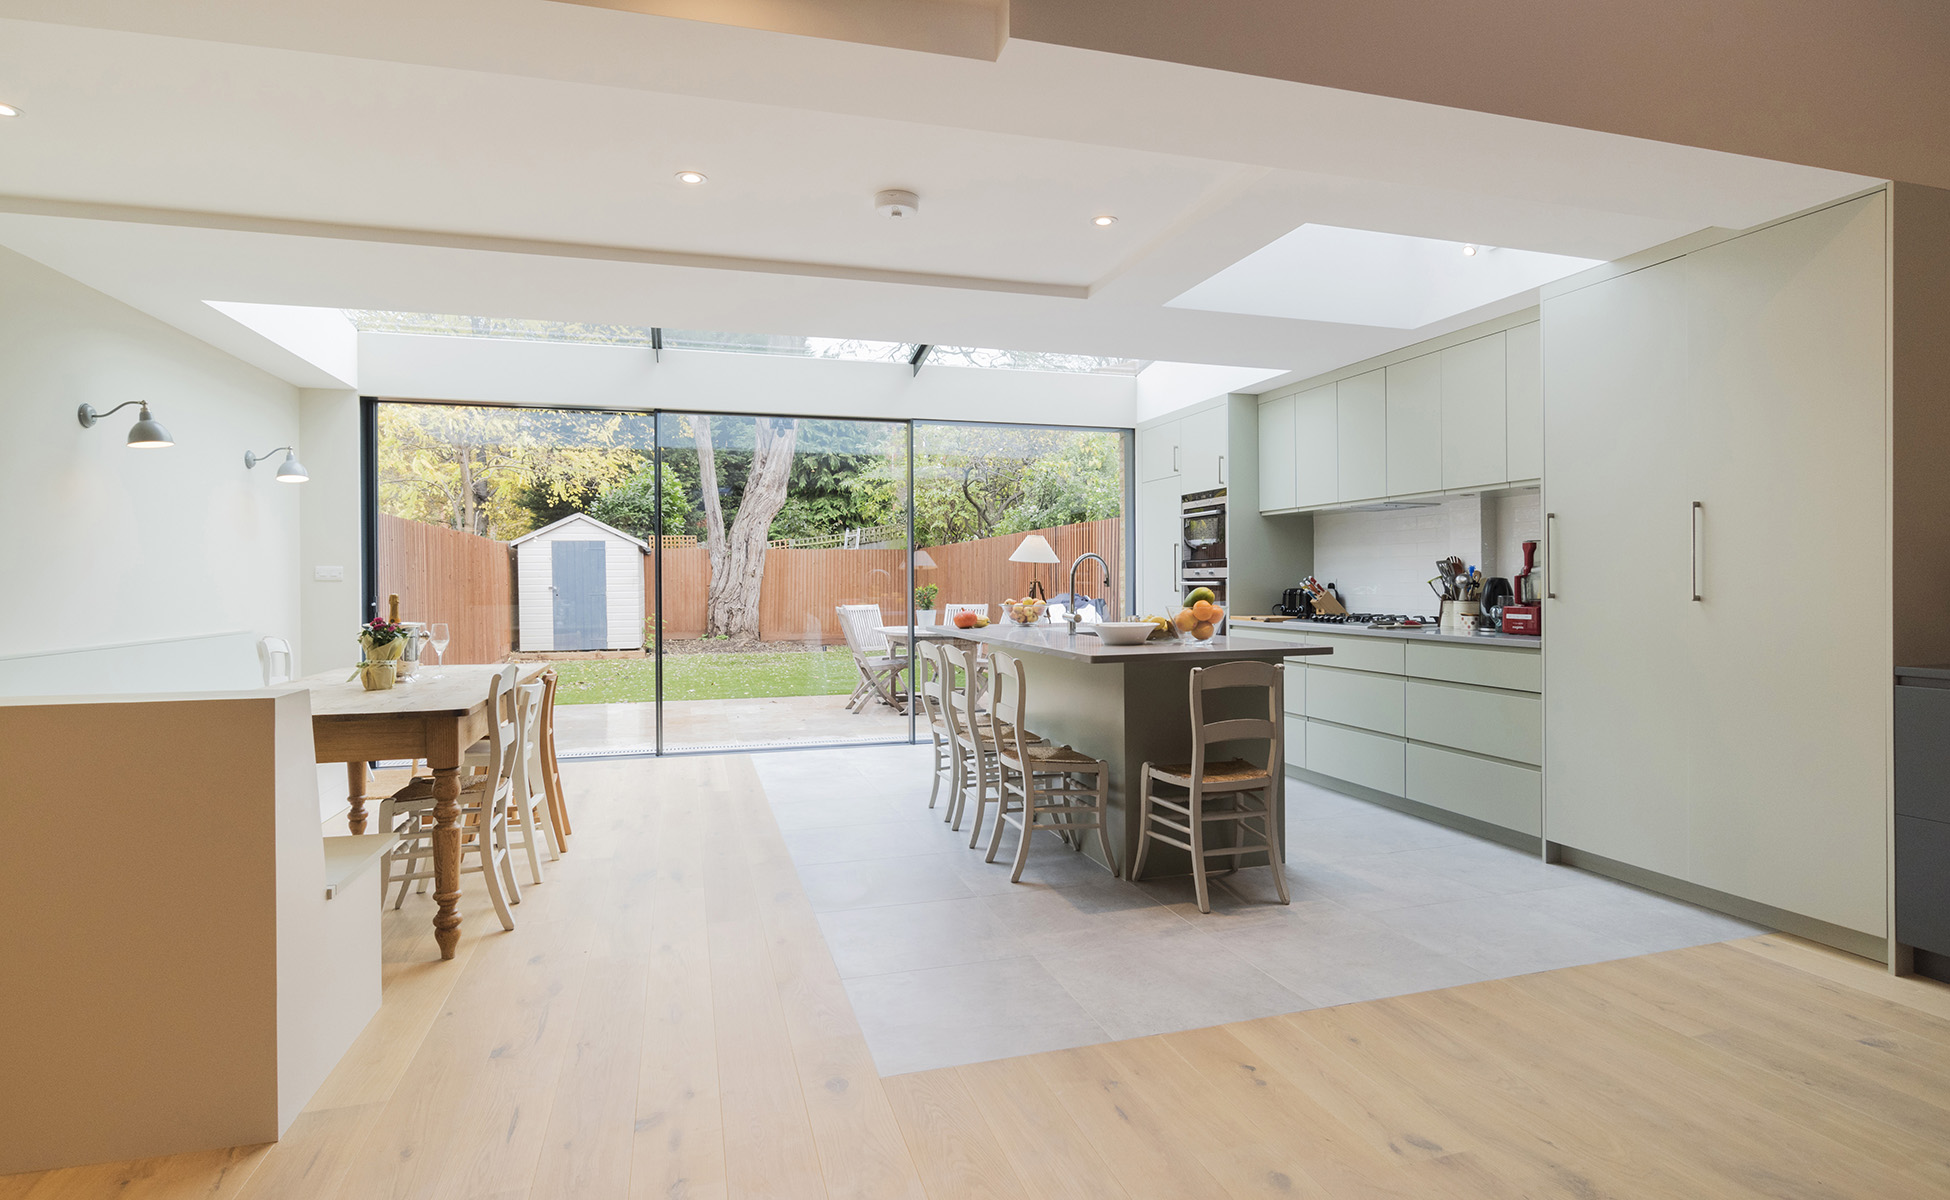 <p>Lovelydays Luxury Rentals introduce you pictures of a charming house in the heart of Chiswick</p>